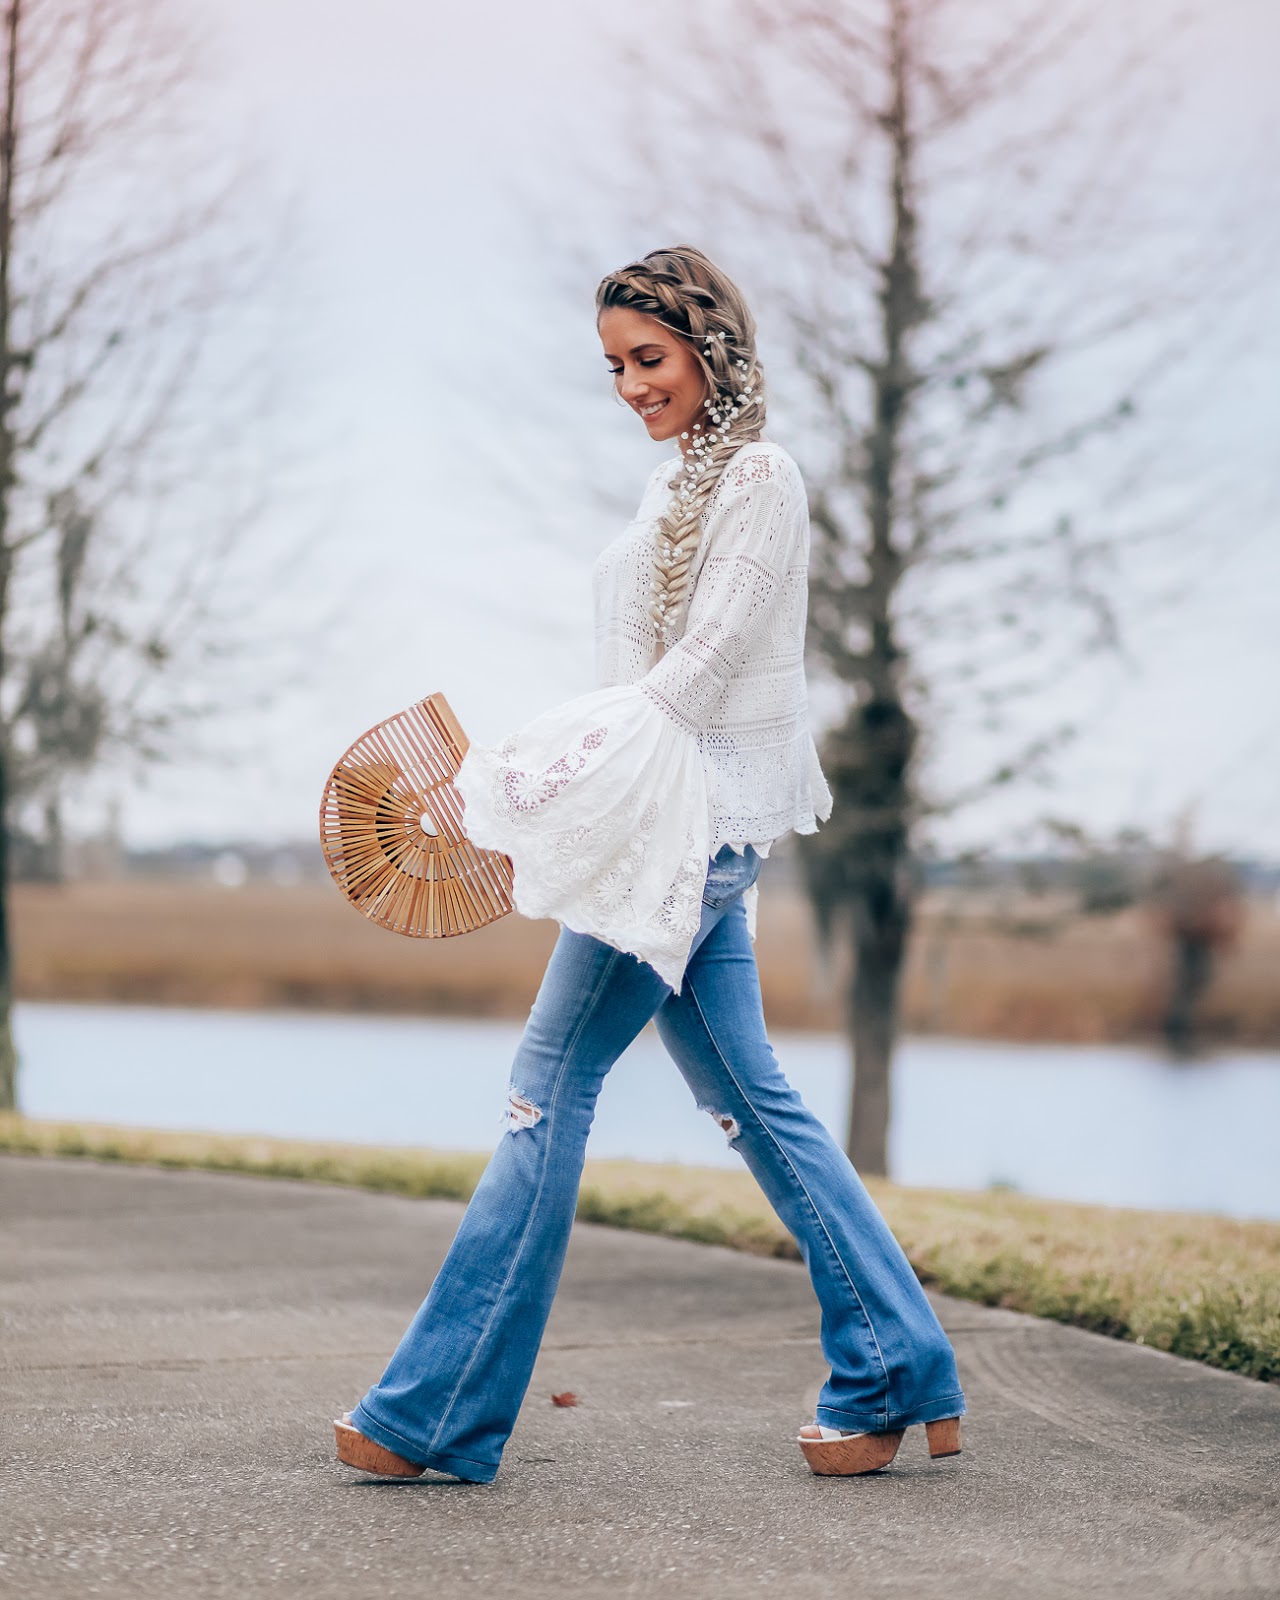 CASUAL CHIC SPRING STYLE - Laura Beverlin